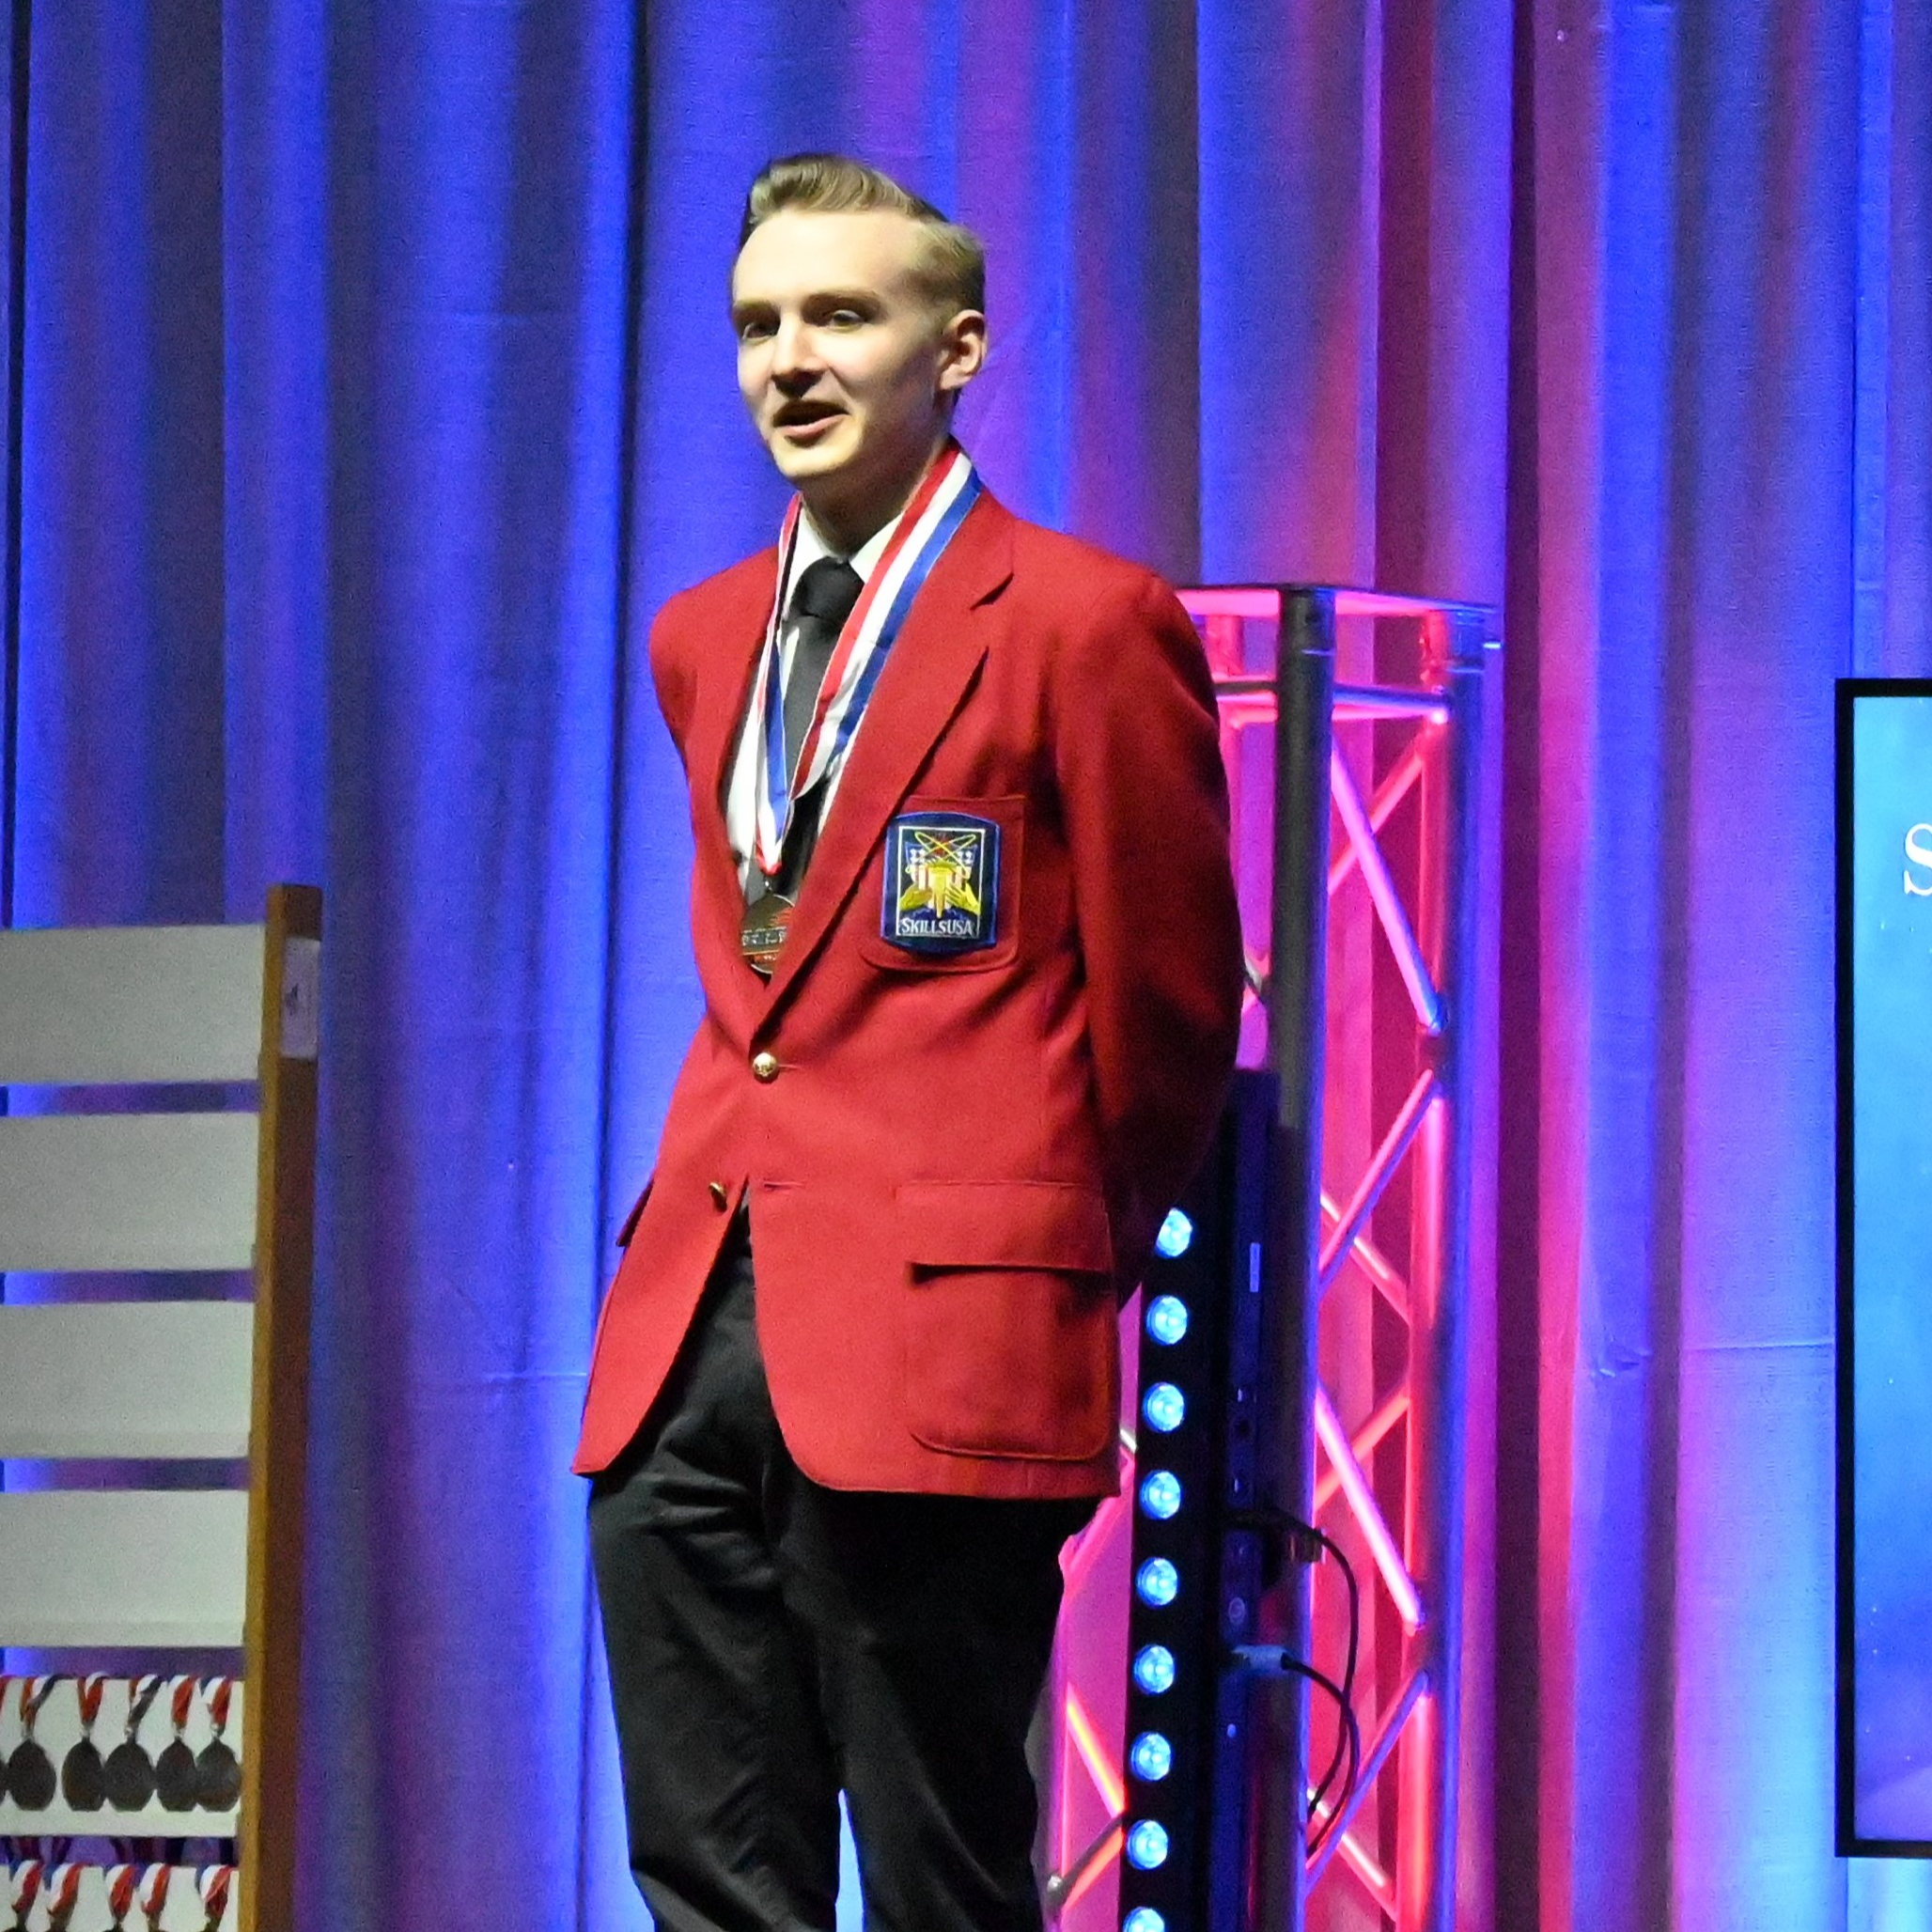 SkillsUSA member receiving award at State competition and being selected to move on to National competition